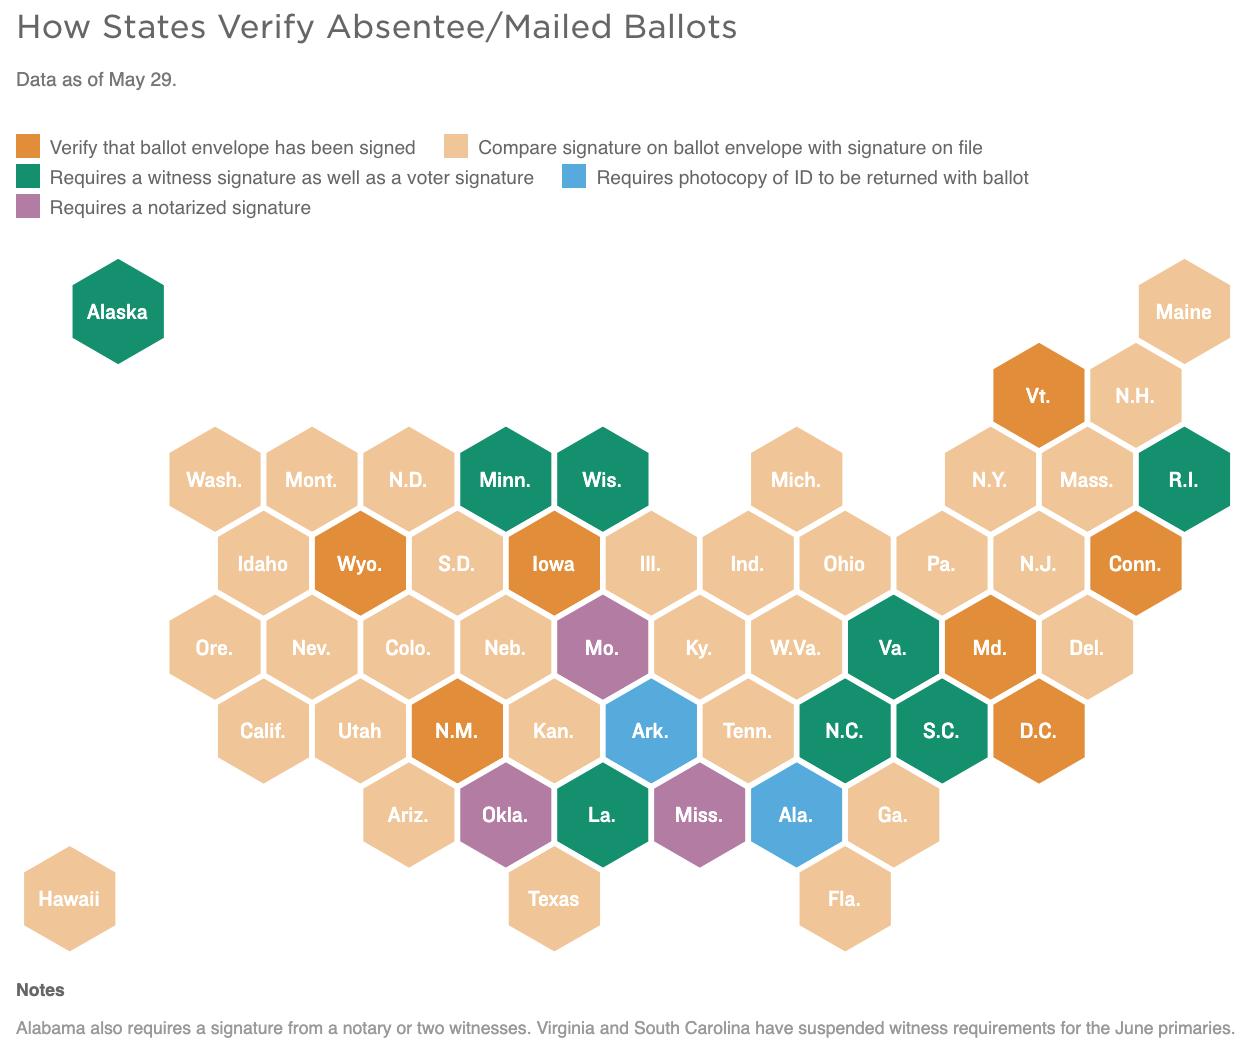 How States Verify Absentee/Mailed Ballots